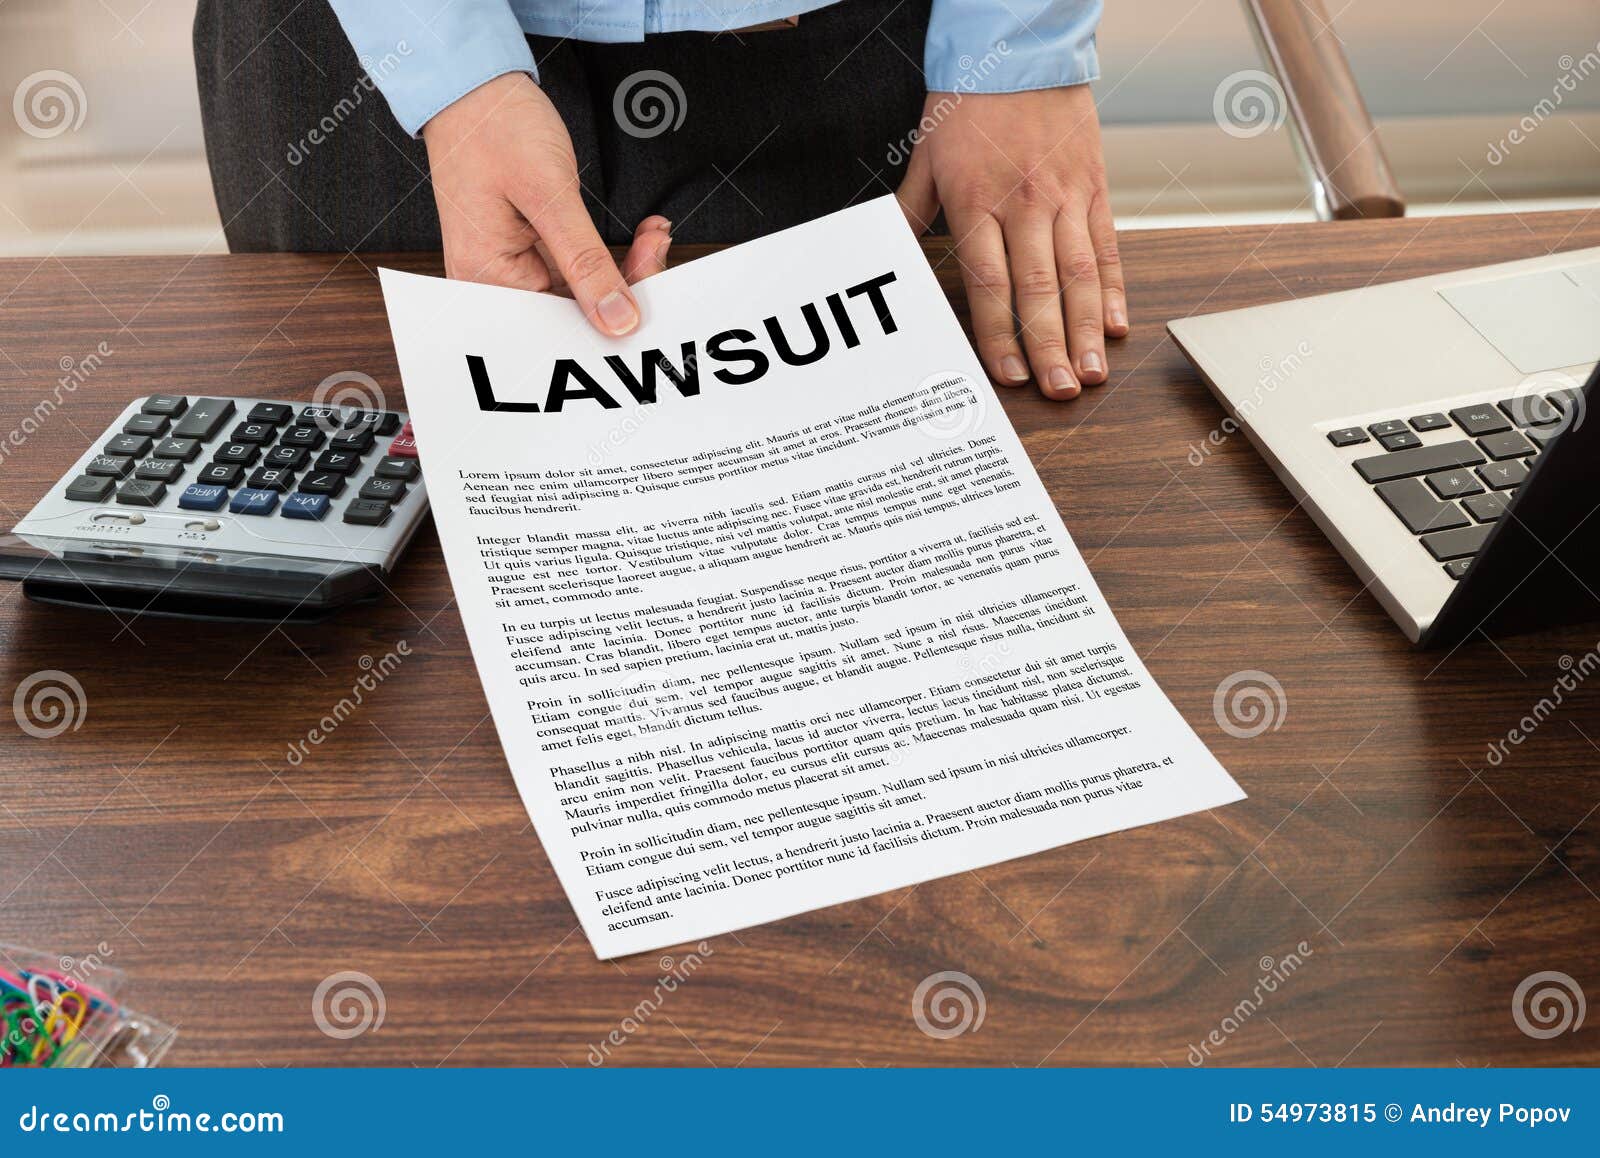 lawyer showing the lawsuit document